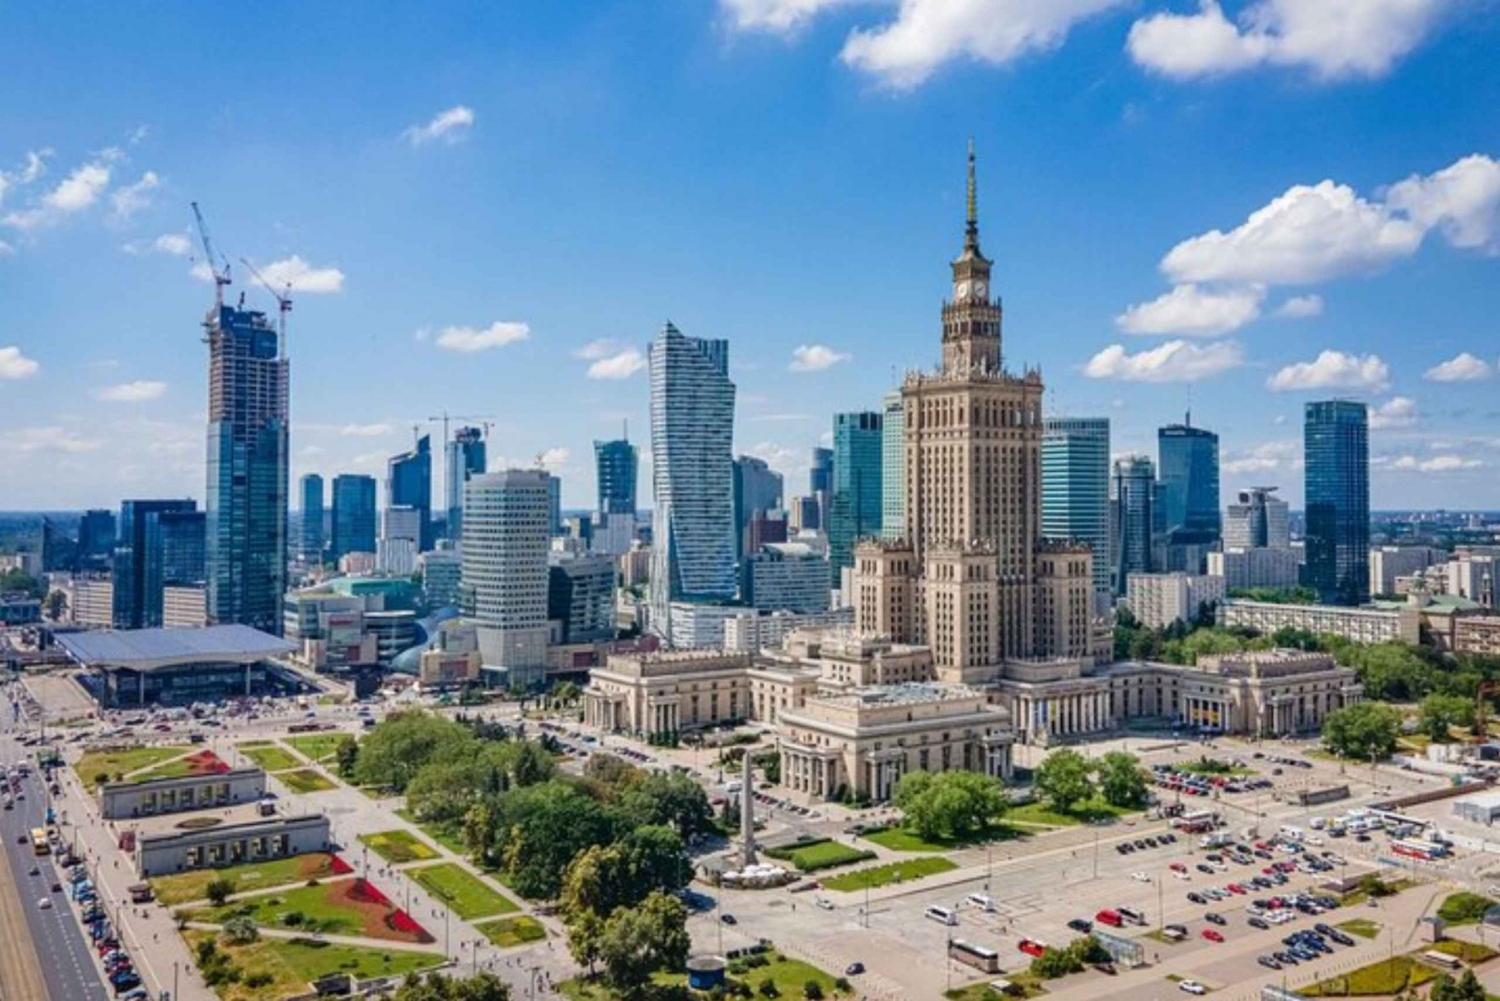 Warsaw: Private custom tour with a local guide